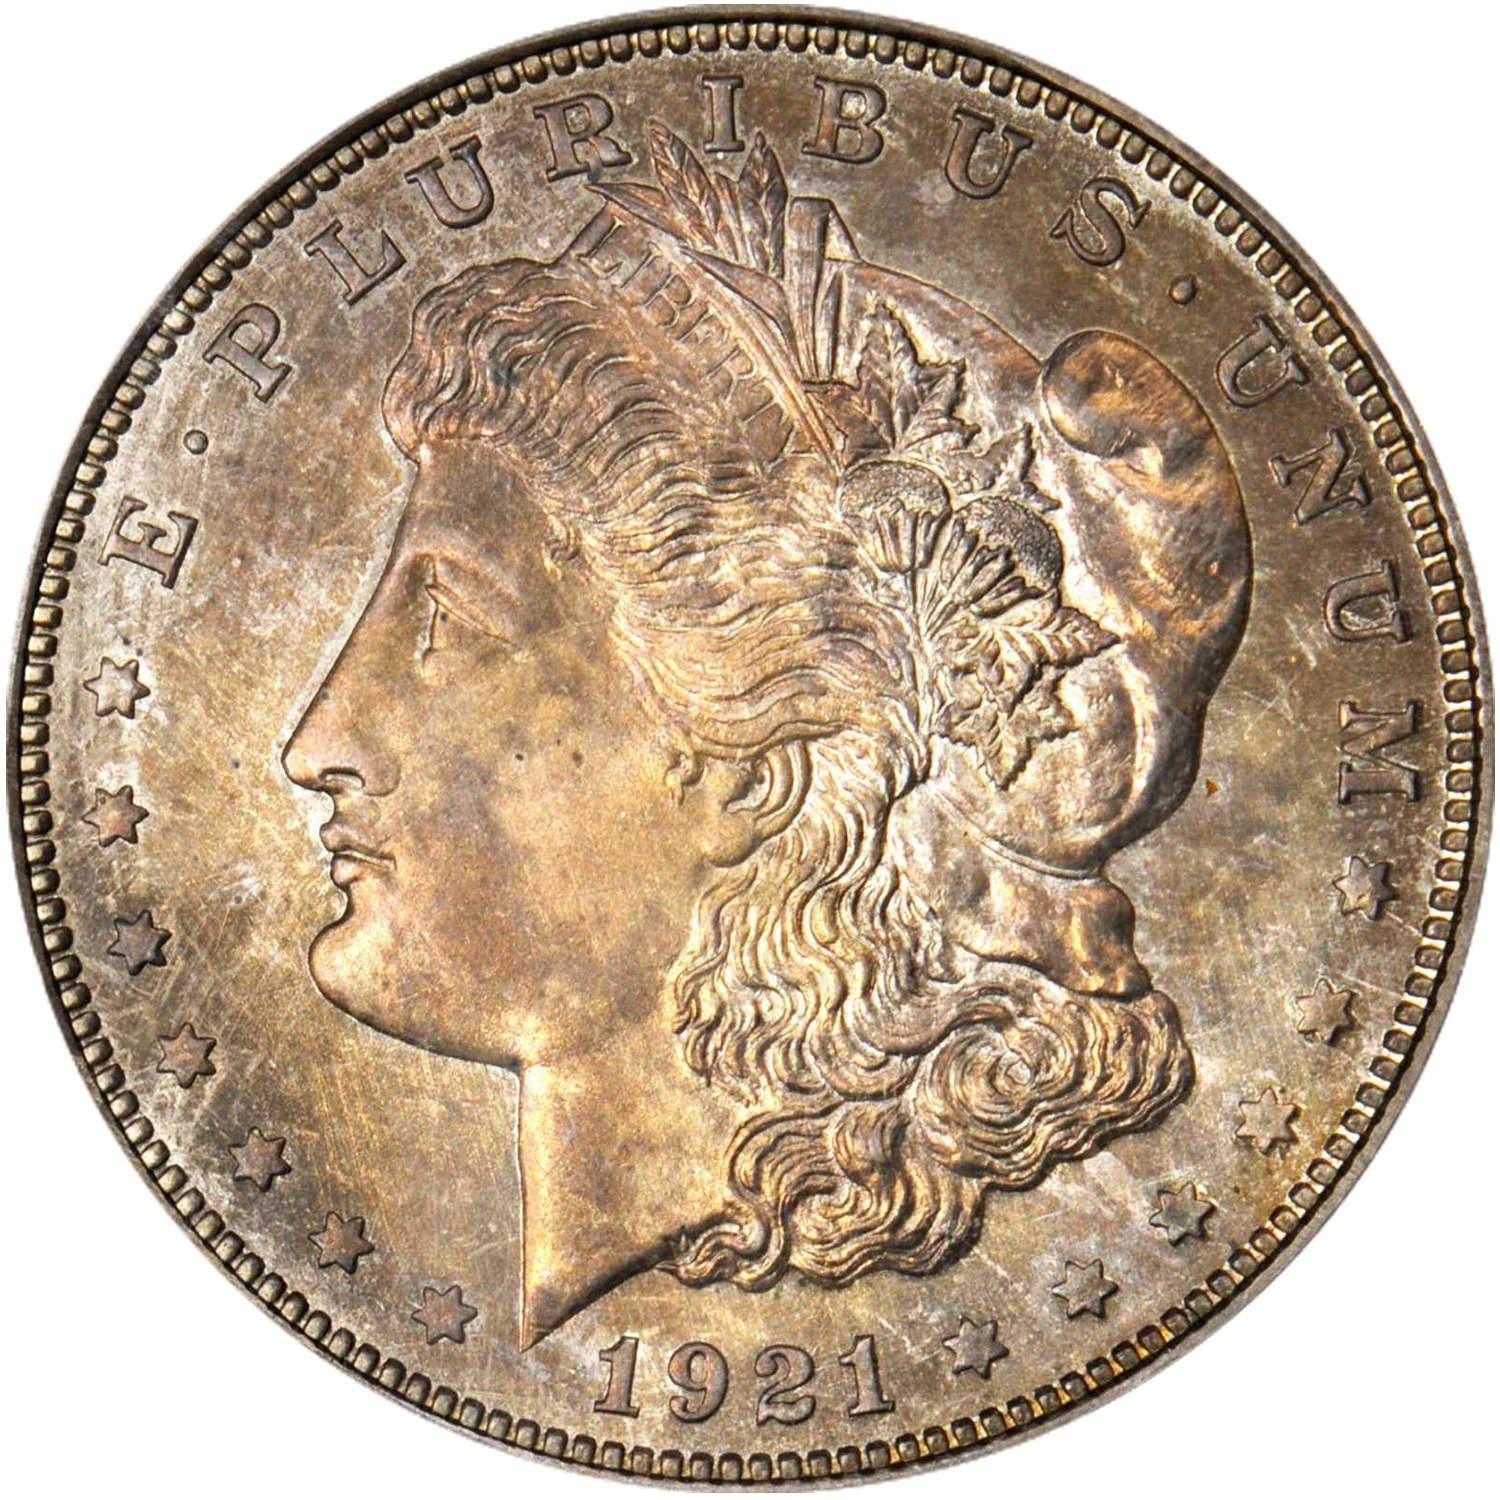 1921 p mint proof morgan dollar price guide value